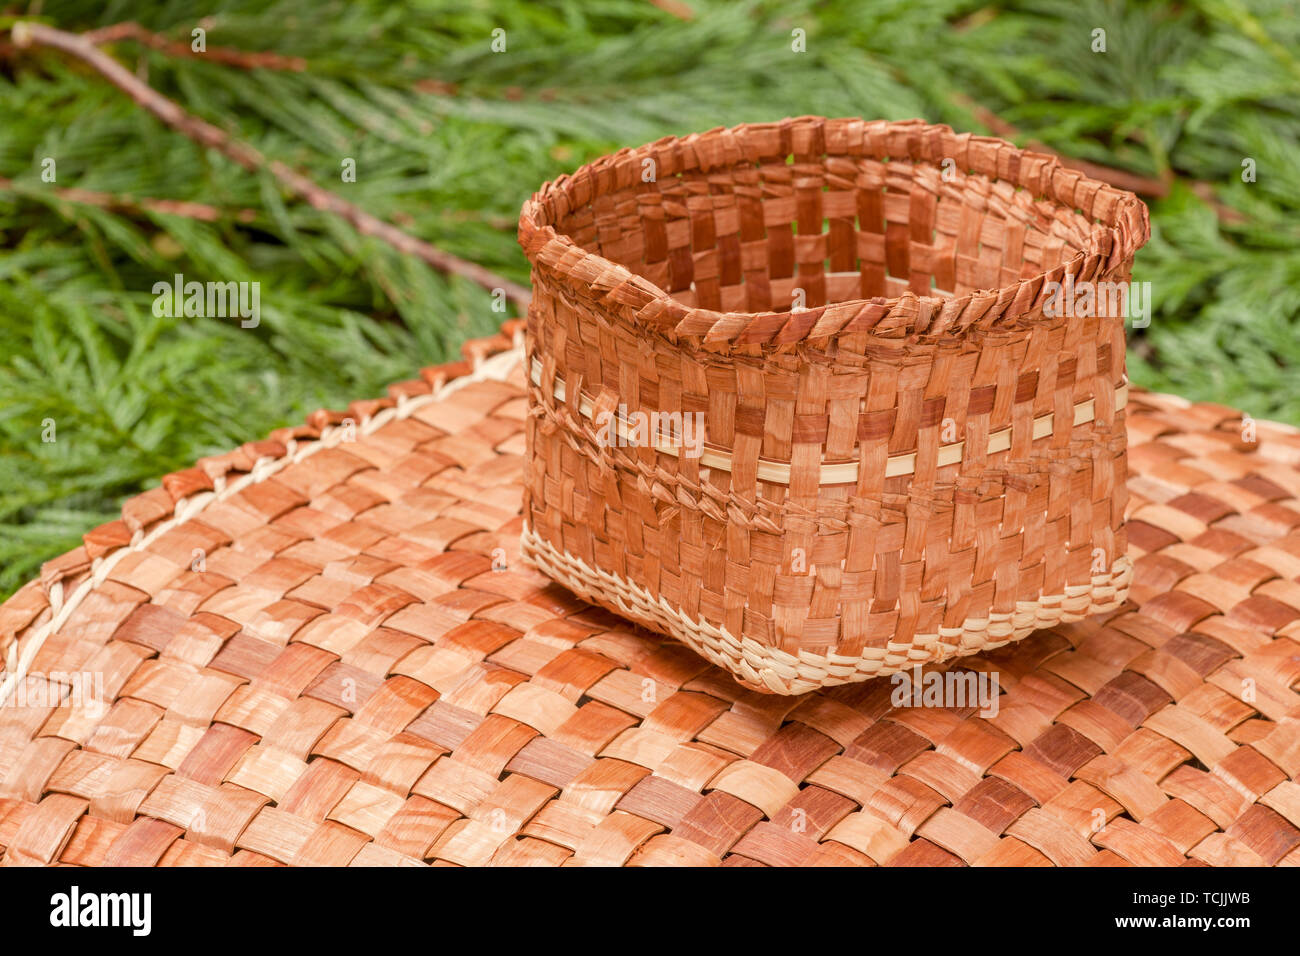 Hand-woven mat and basket made from the pliant inner bark of a Western Red Cedar tree, resting on Western Red Cedar branchlets. Stock Photo